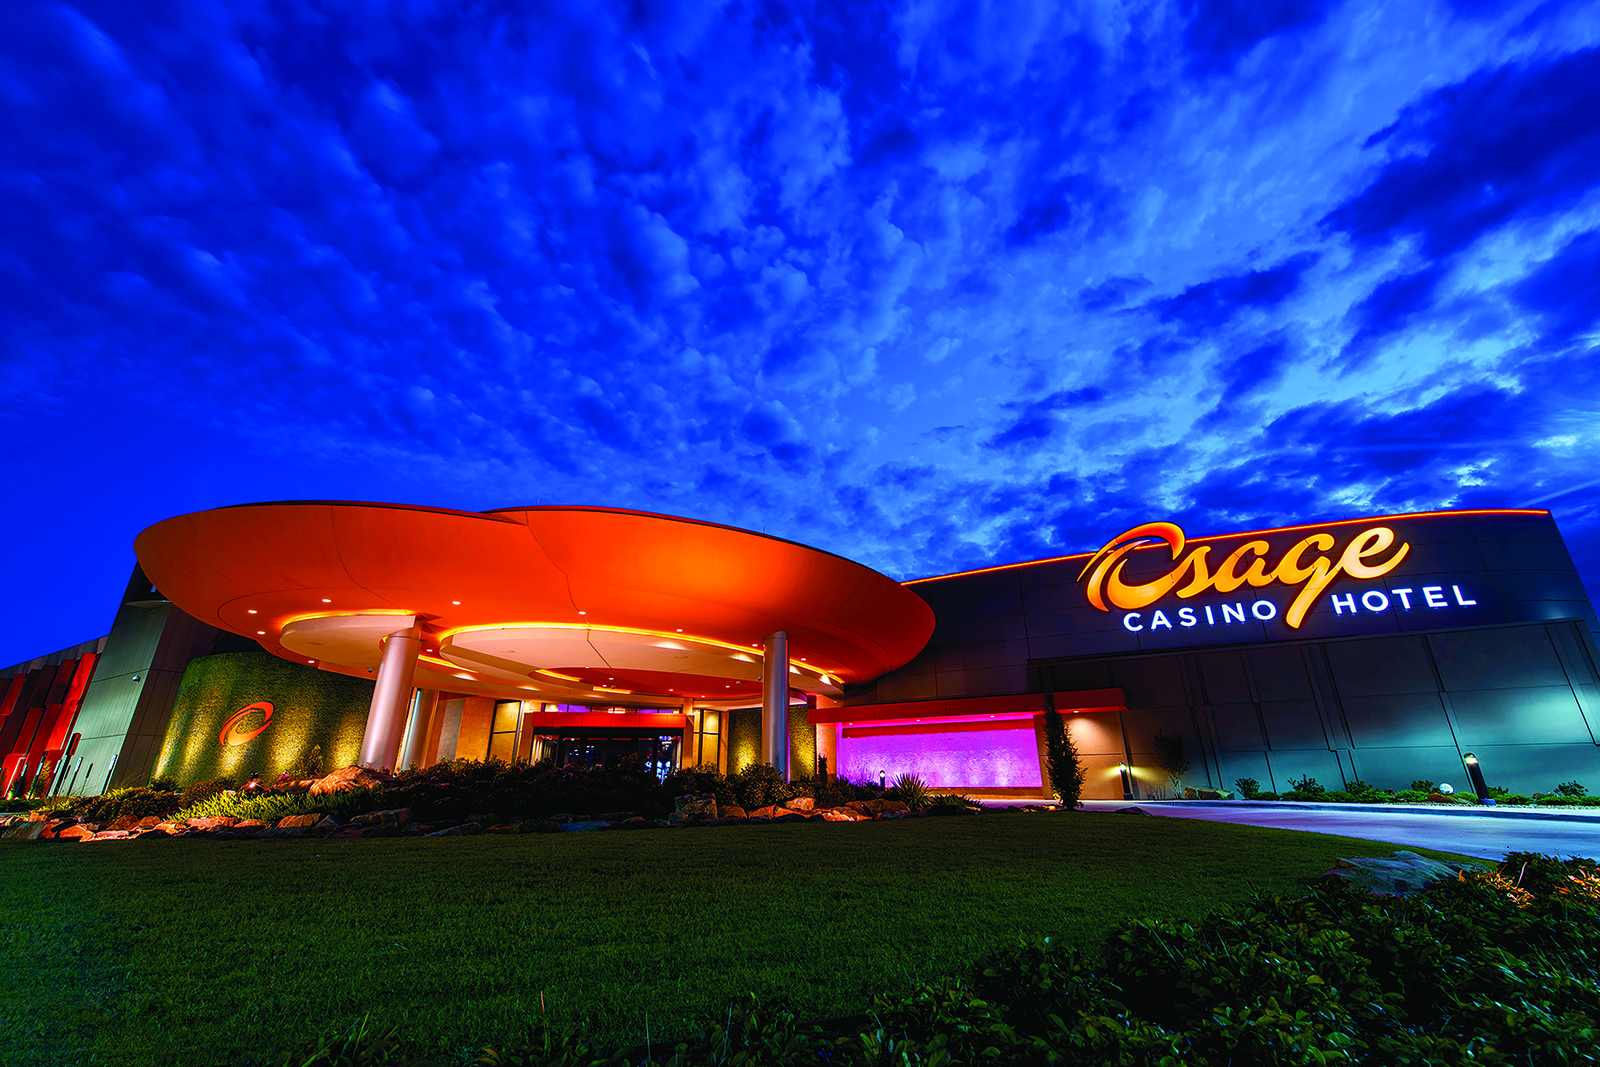 Osage Casino Hotel pool, hotel buffet, restaurants, and spa. Located in Skiatook, OK and Ponca City, OK.